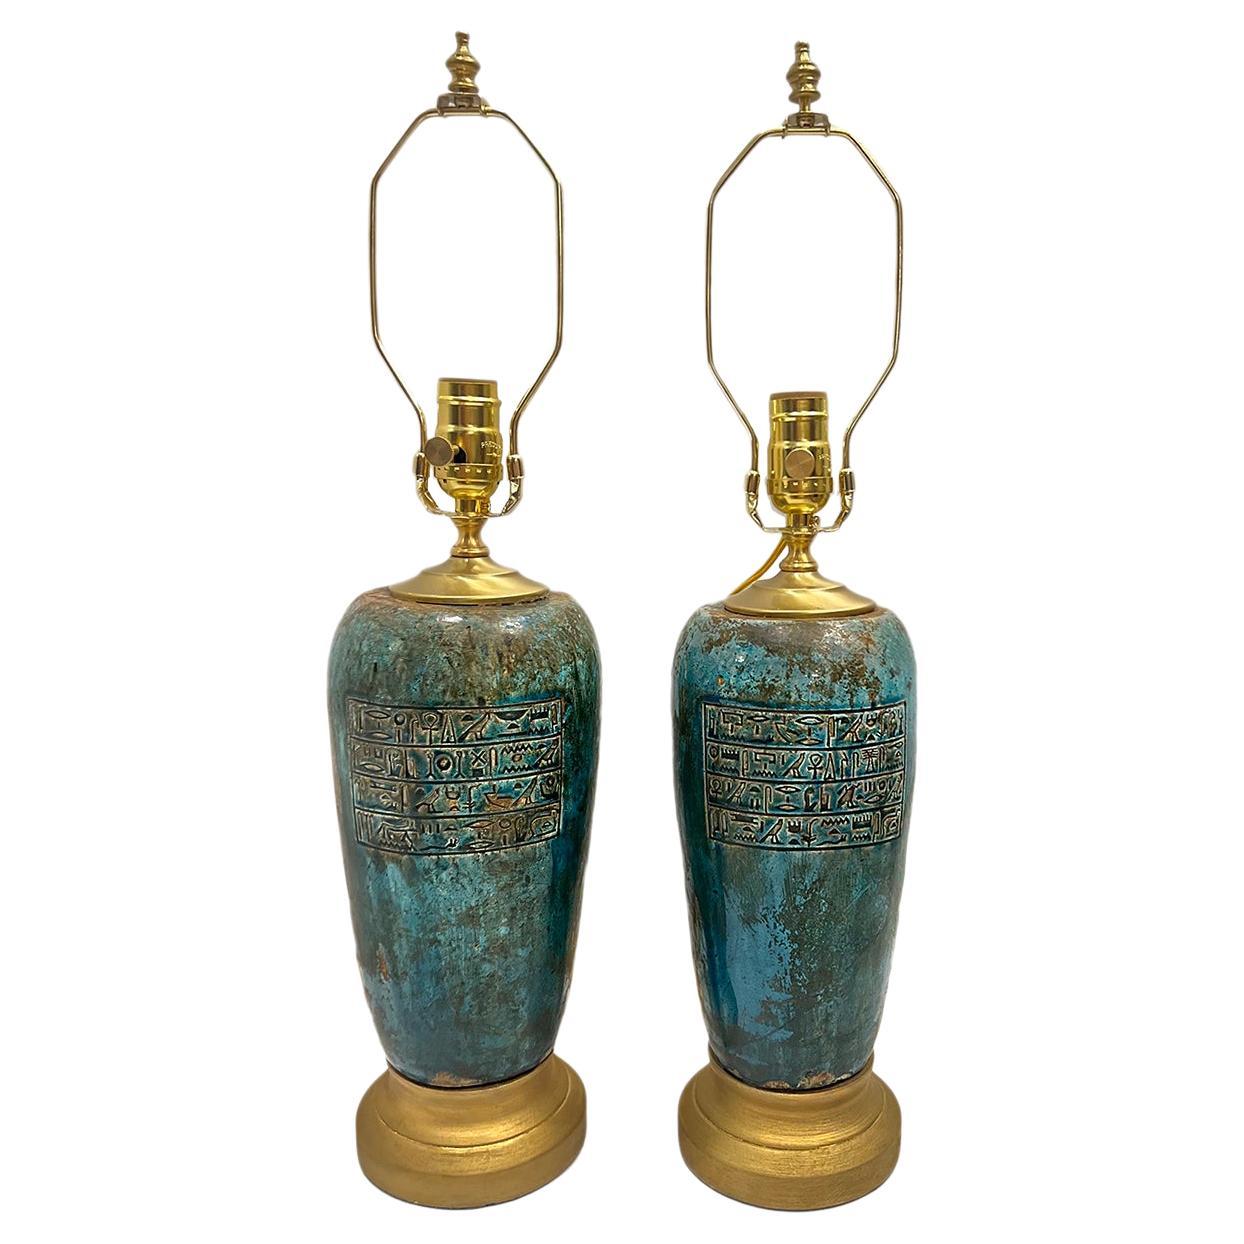 Pair of Vintage Egyptian Motif Lamps